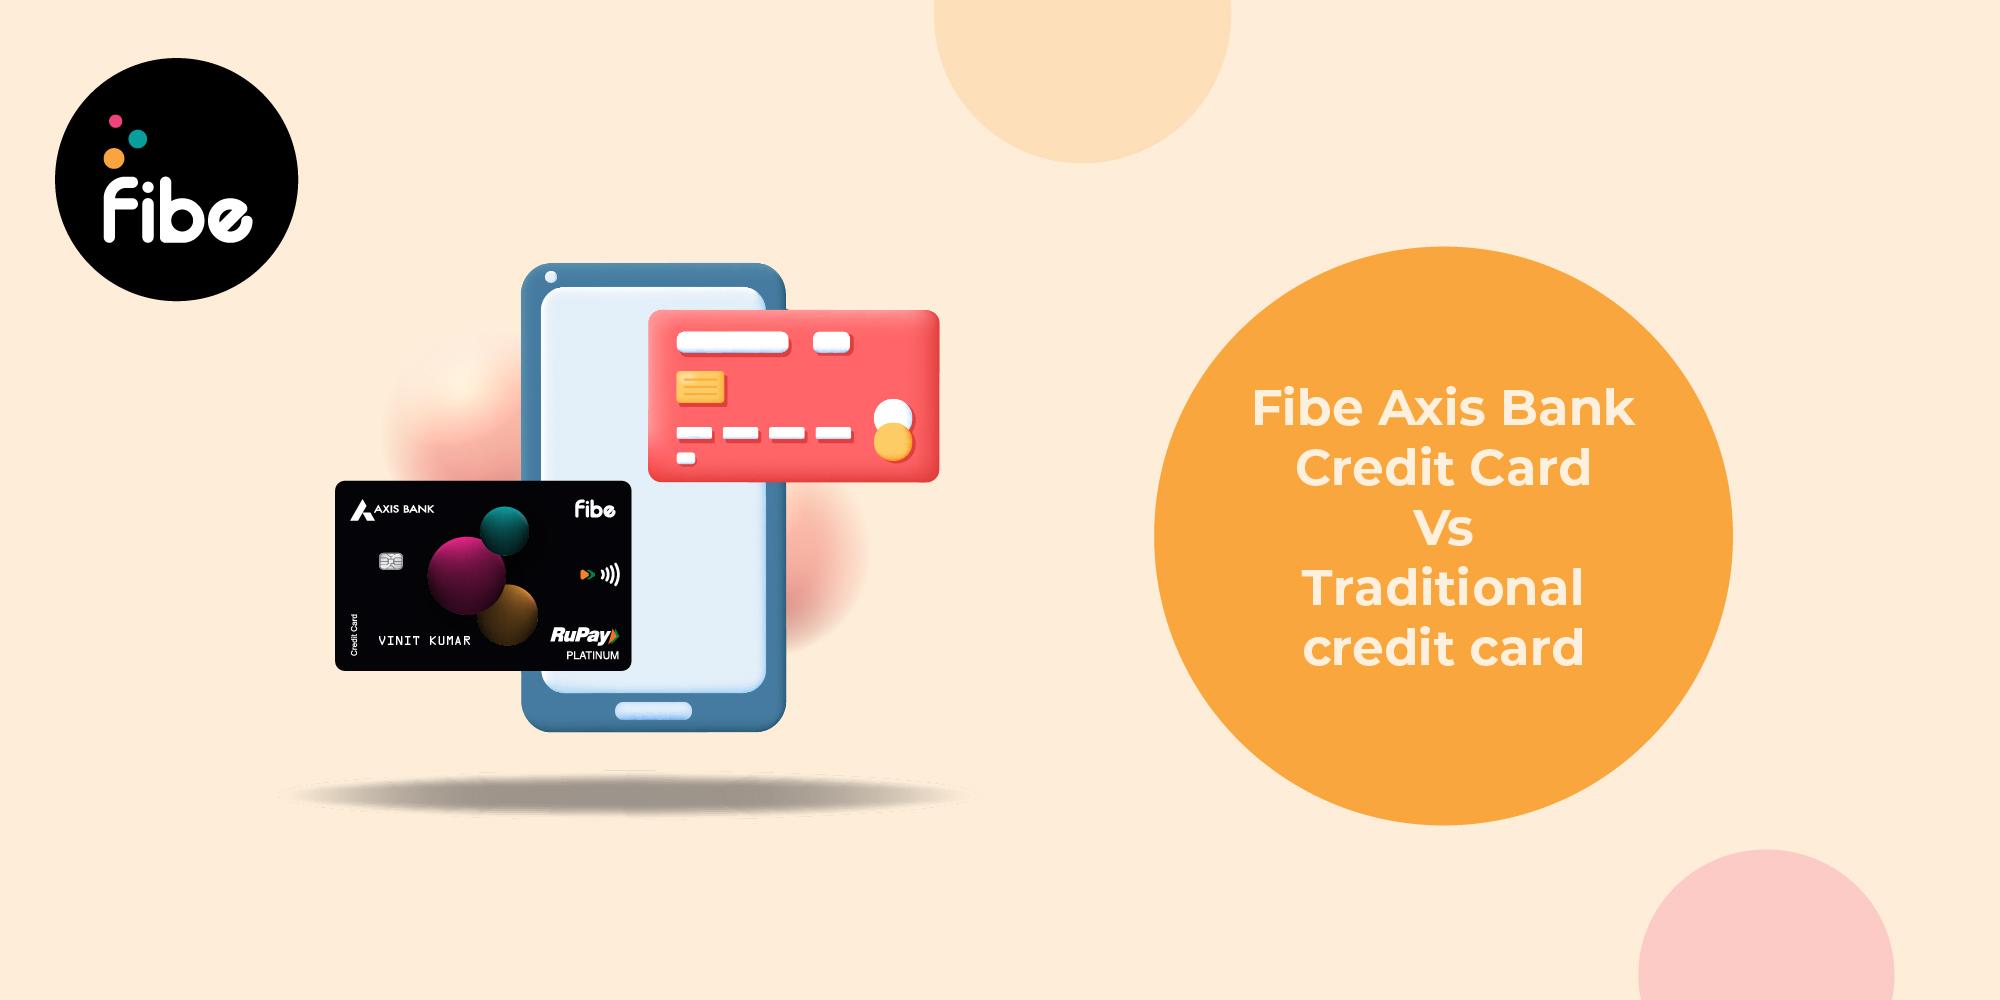 Fibe Credit Card vs Traditional Credit Card: All You Need to Know